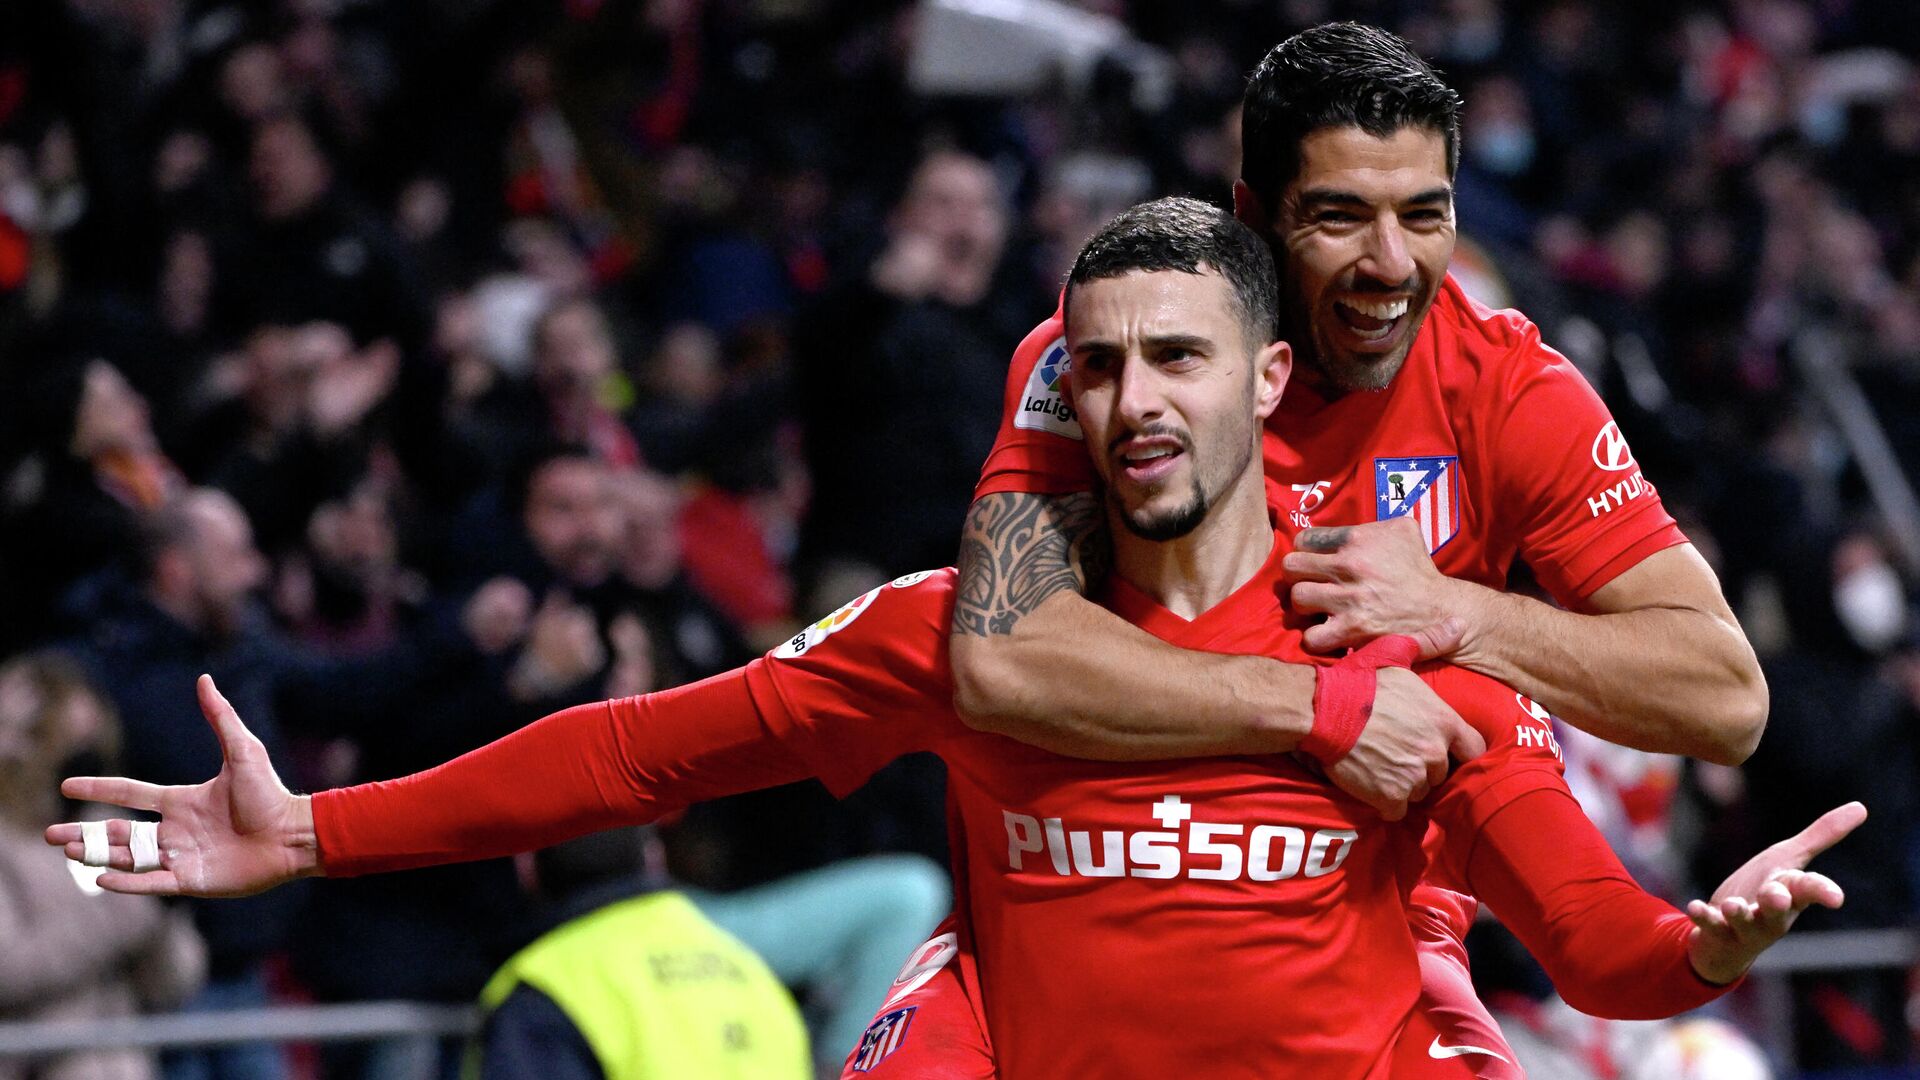 Atletico Madrid's Spanish defender Mario Hermoso (L) celebrates with Atletico Madrid's Uruguayan forward Luis Suarez after scoring his team's third goal during the Spanish league football match between Club Atletico de Madrid and Valencia CF at the Wanda Metropolitano stadium in Madrid on January 22, 2022. (Photo by PIERRE-PHILIPPE MARCOU / AFP) - РИА Новости, 1920, 23.01.2022